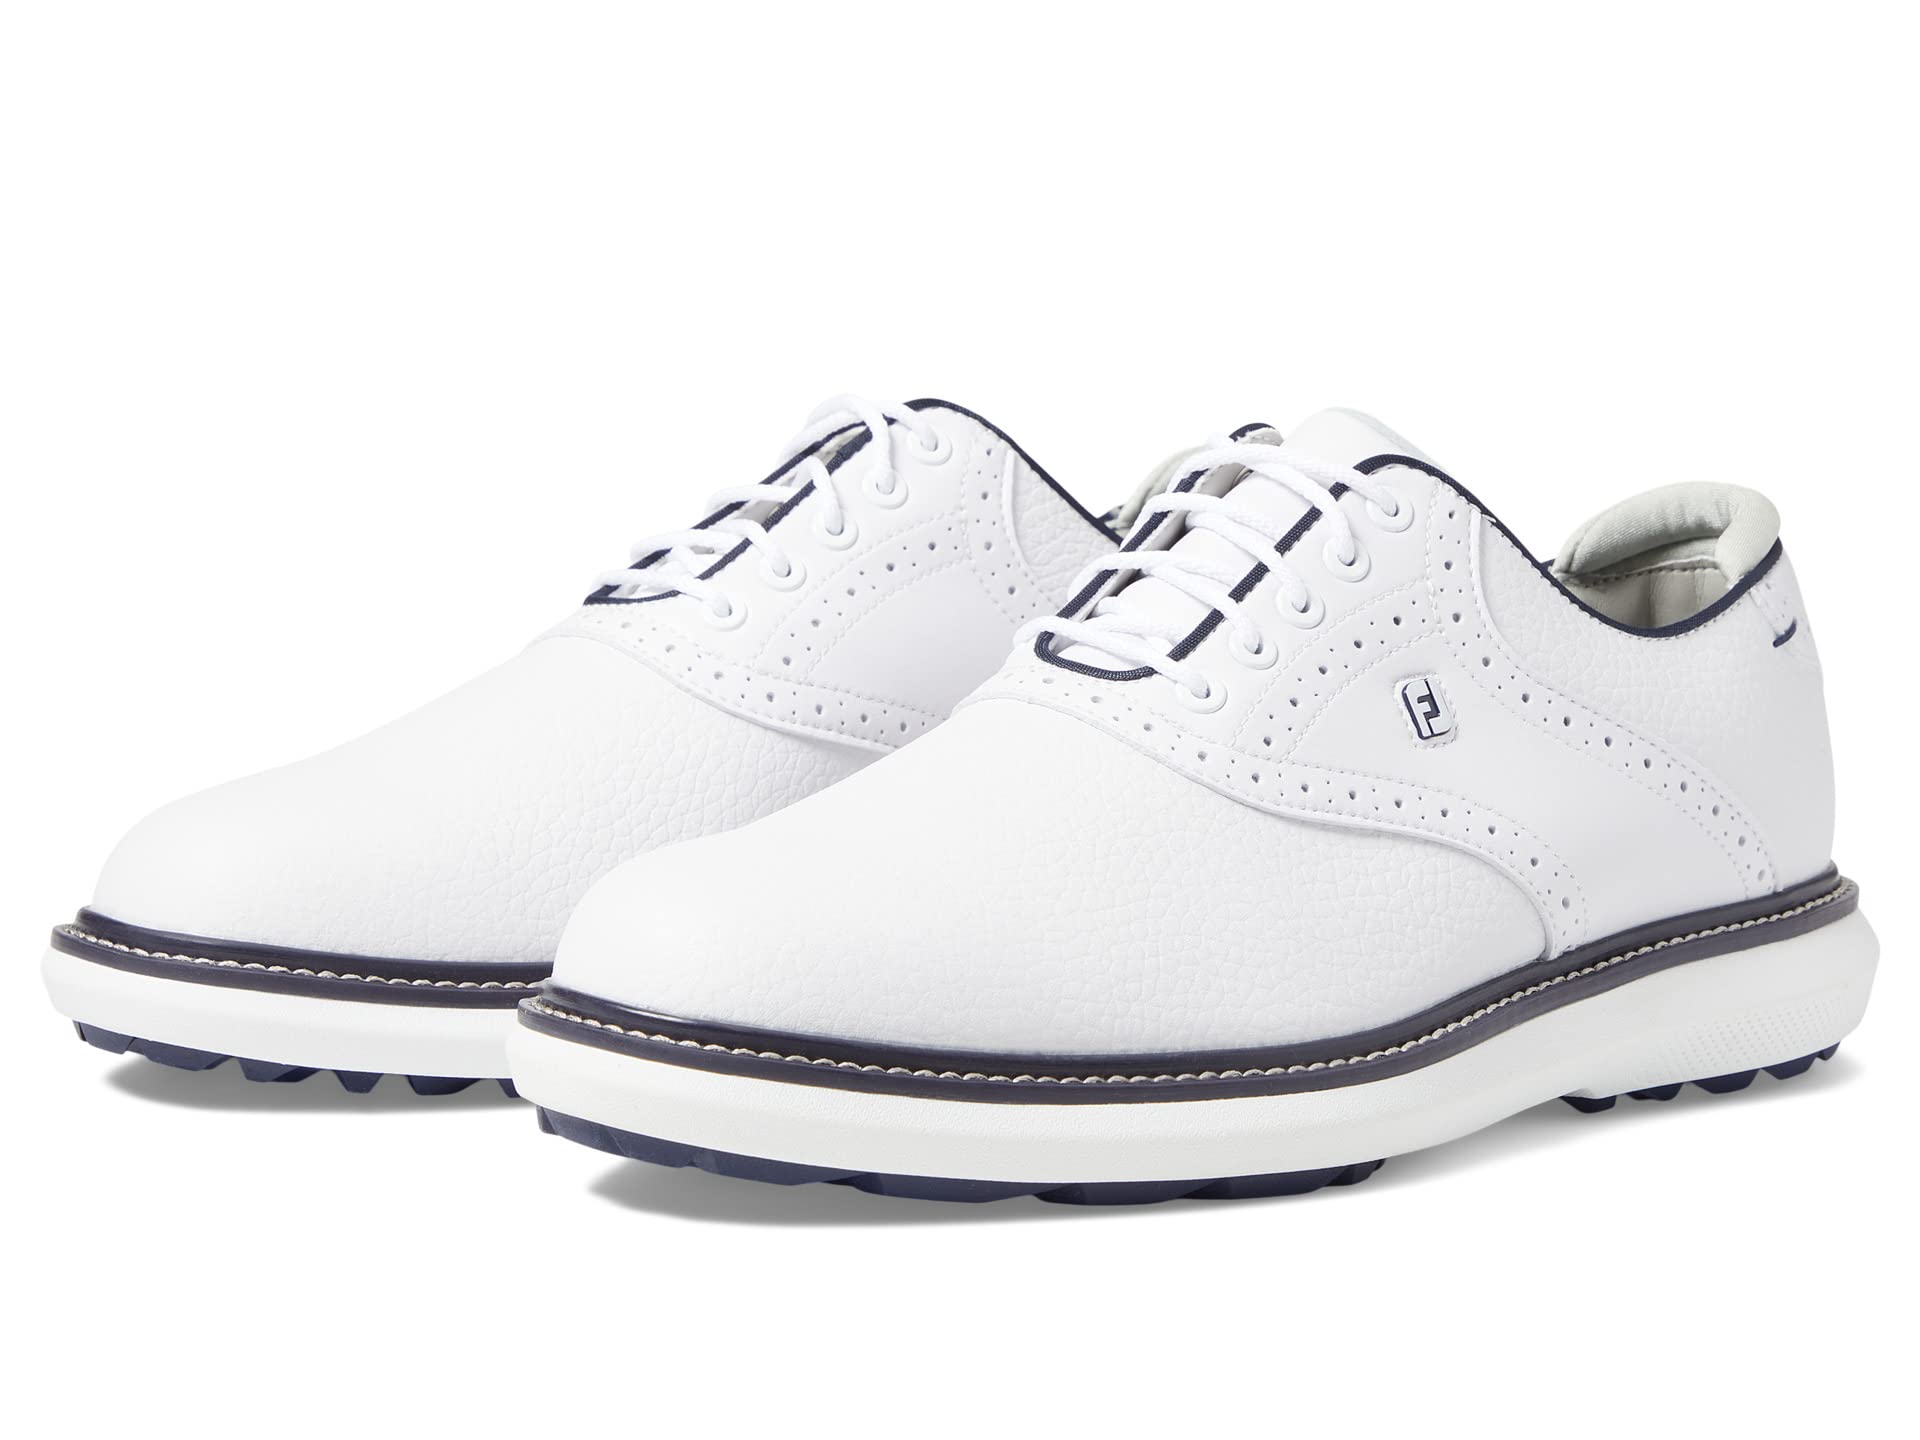 Traditions Spikeless Golf Shoes FootJoy